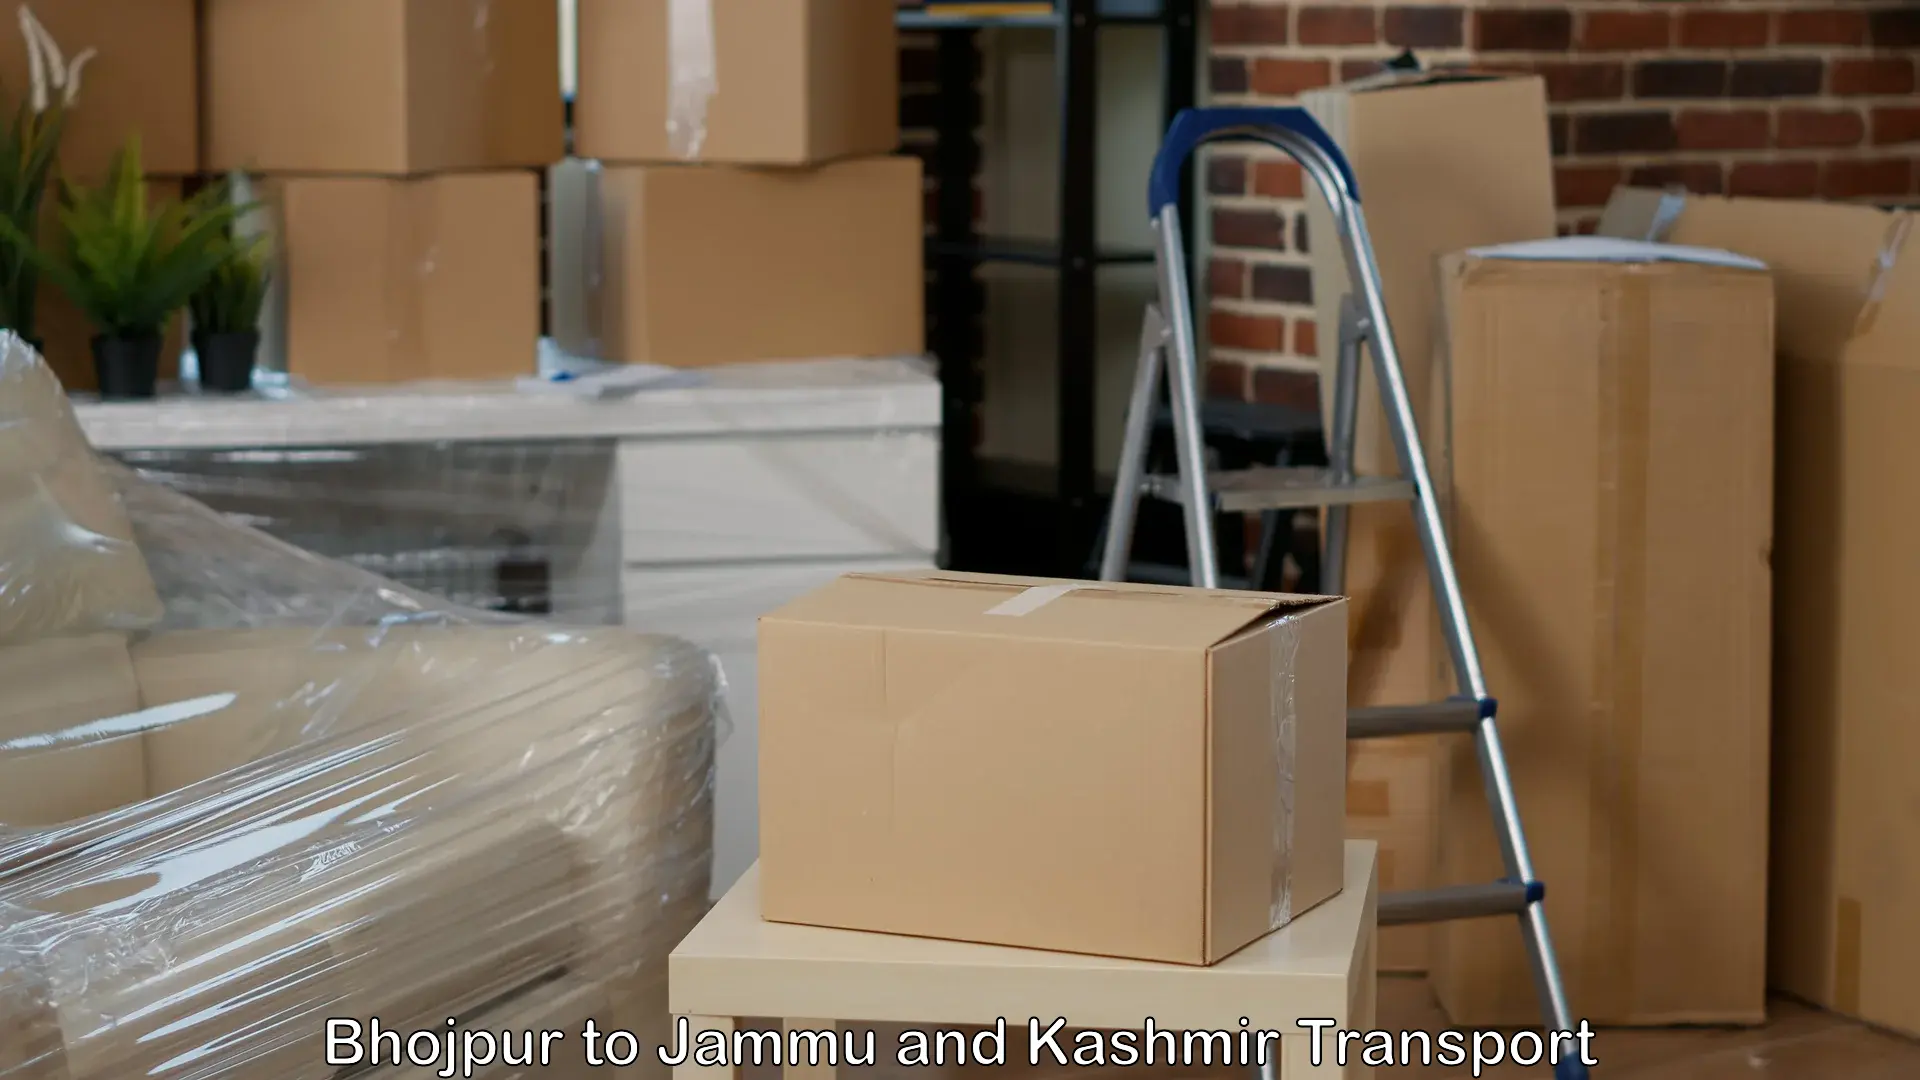 Daily parcel service transport Bhojpur to Jammu and Kashmir